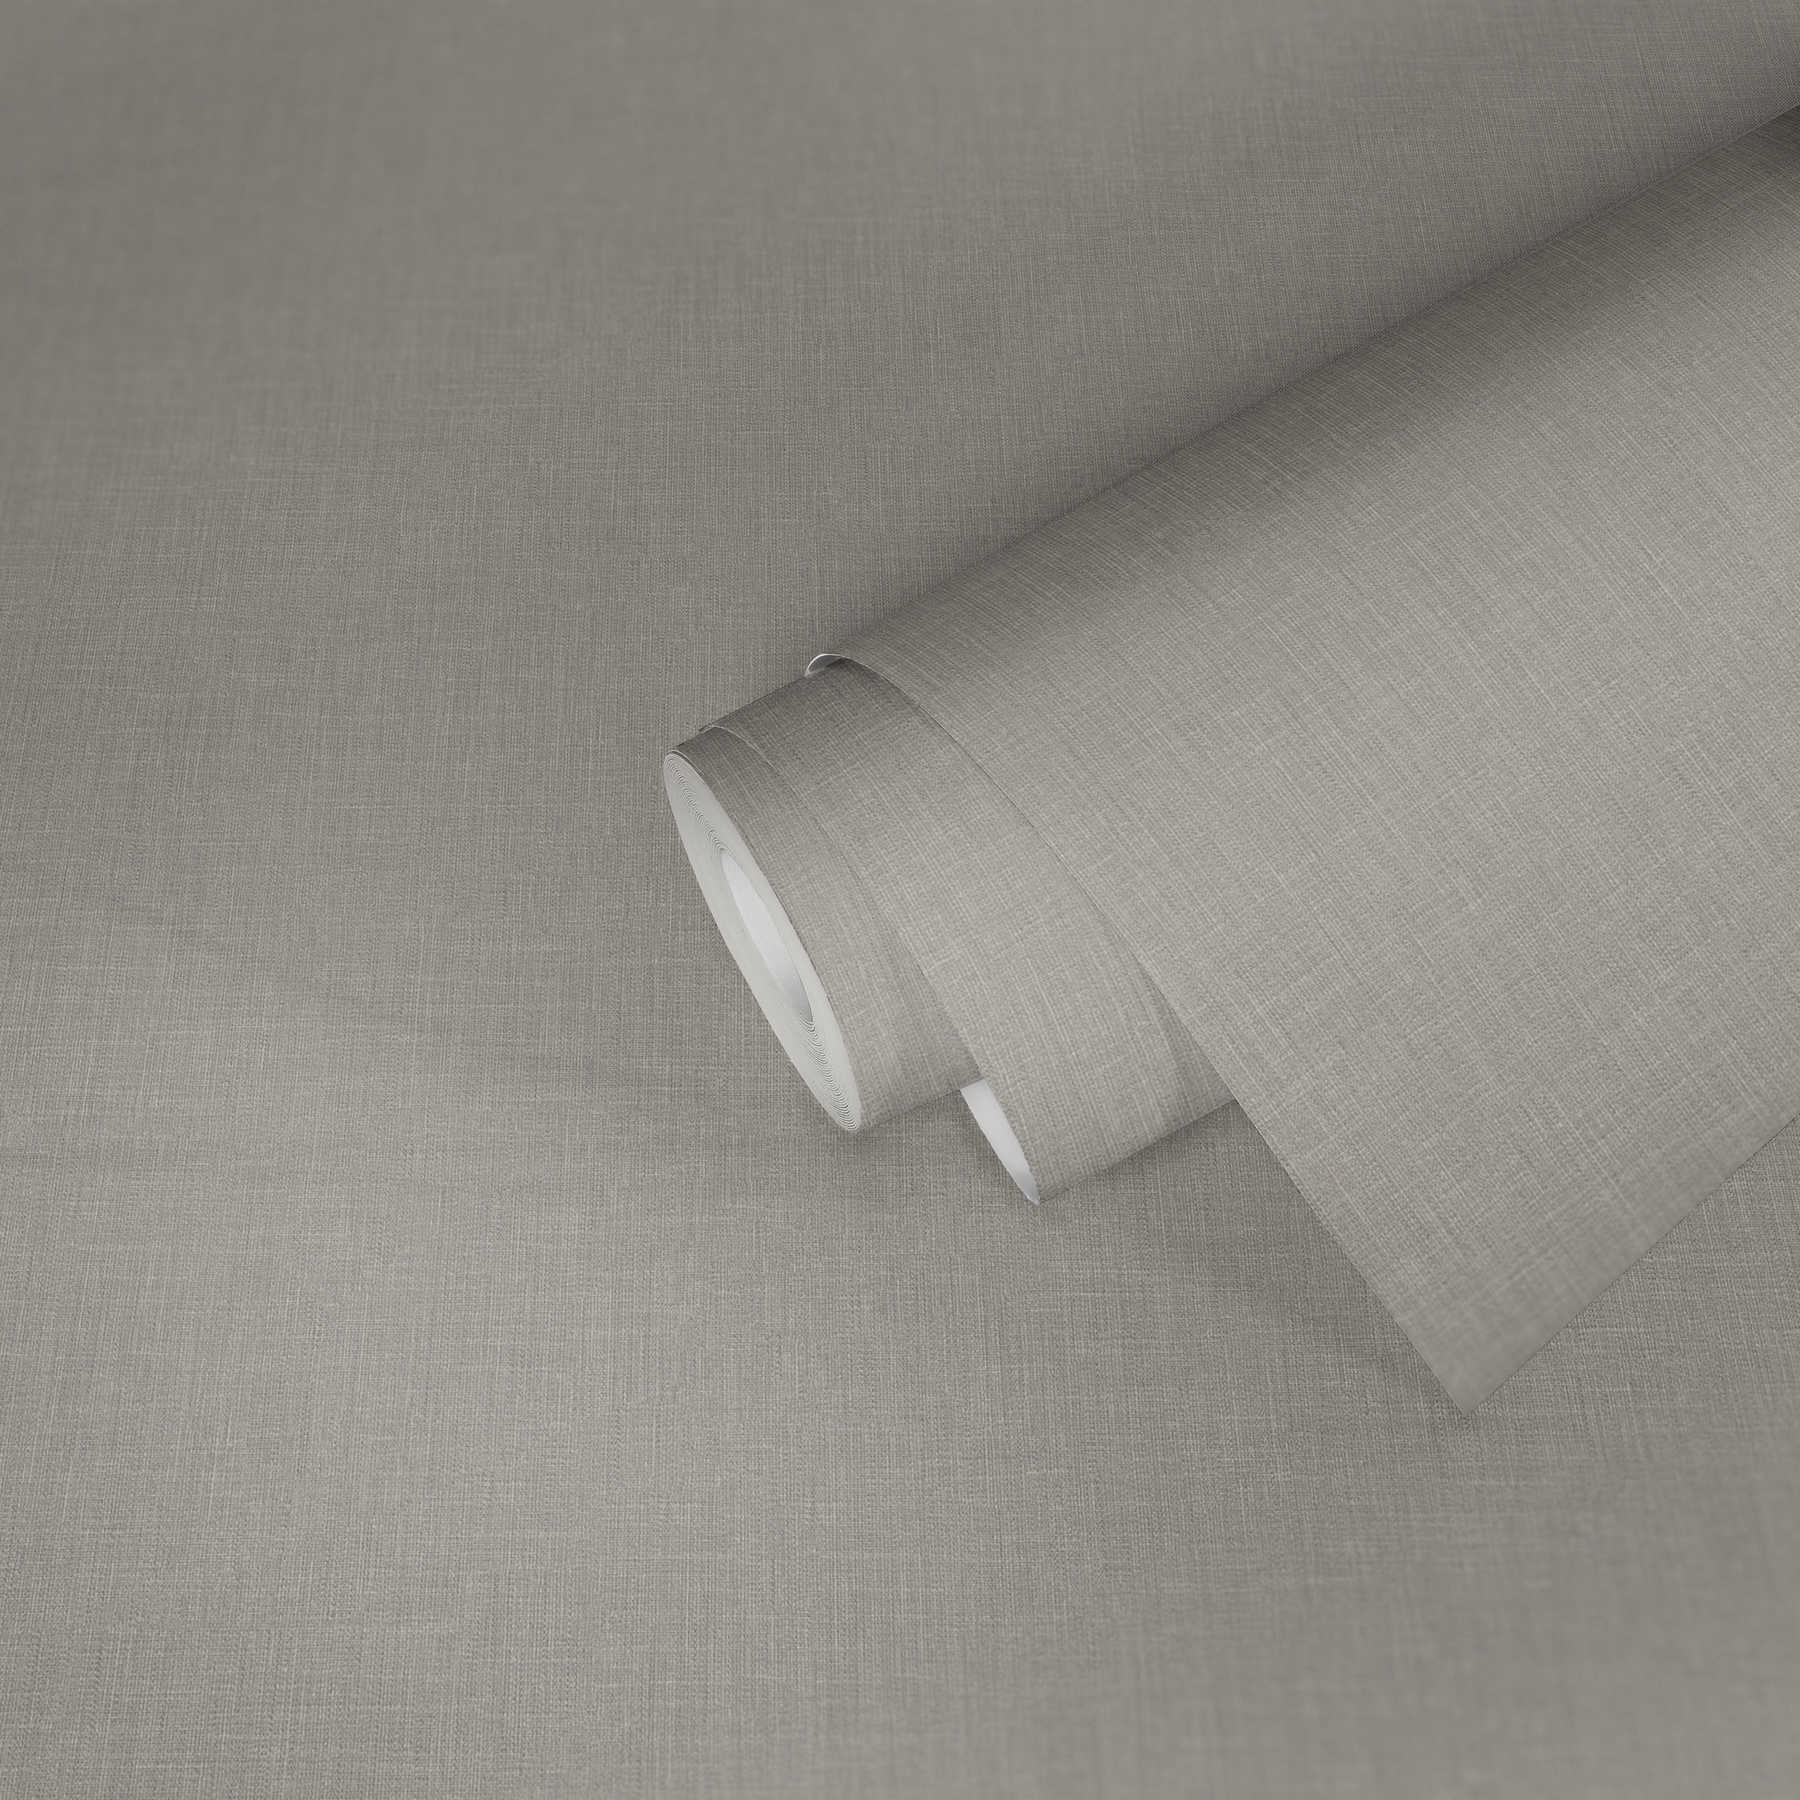             Non-woven wallpaper grey with textile look & texture pattern
        